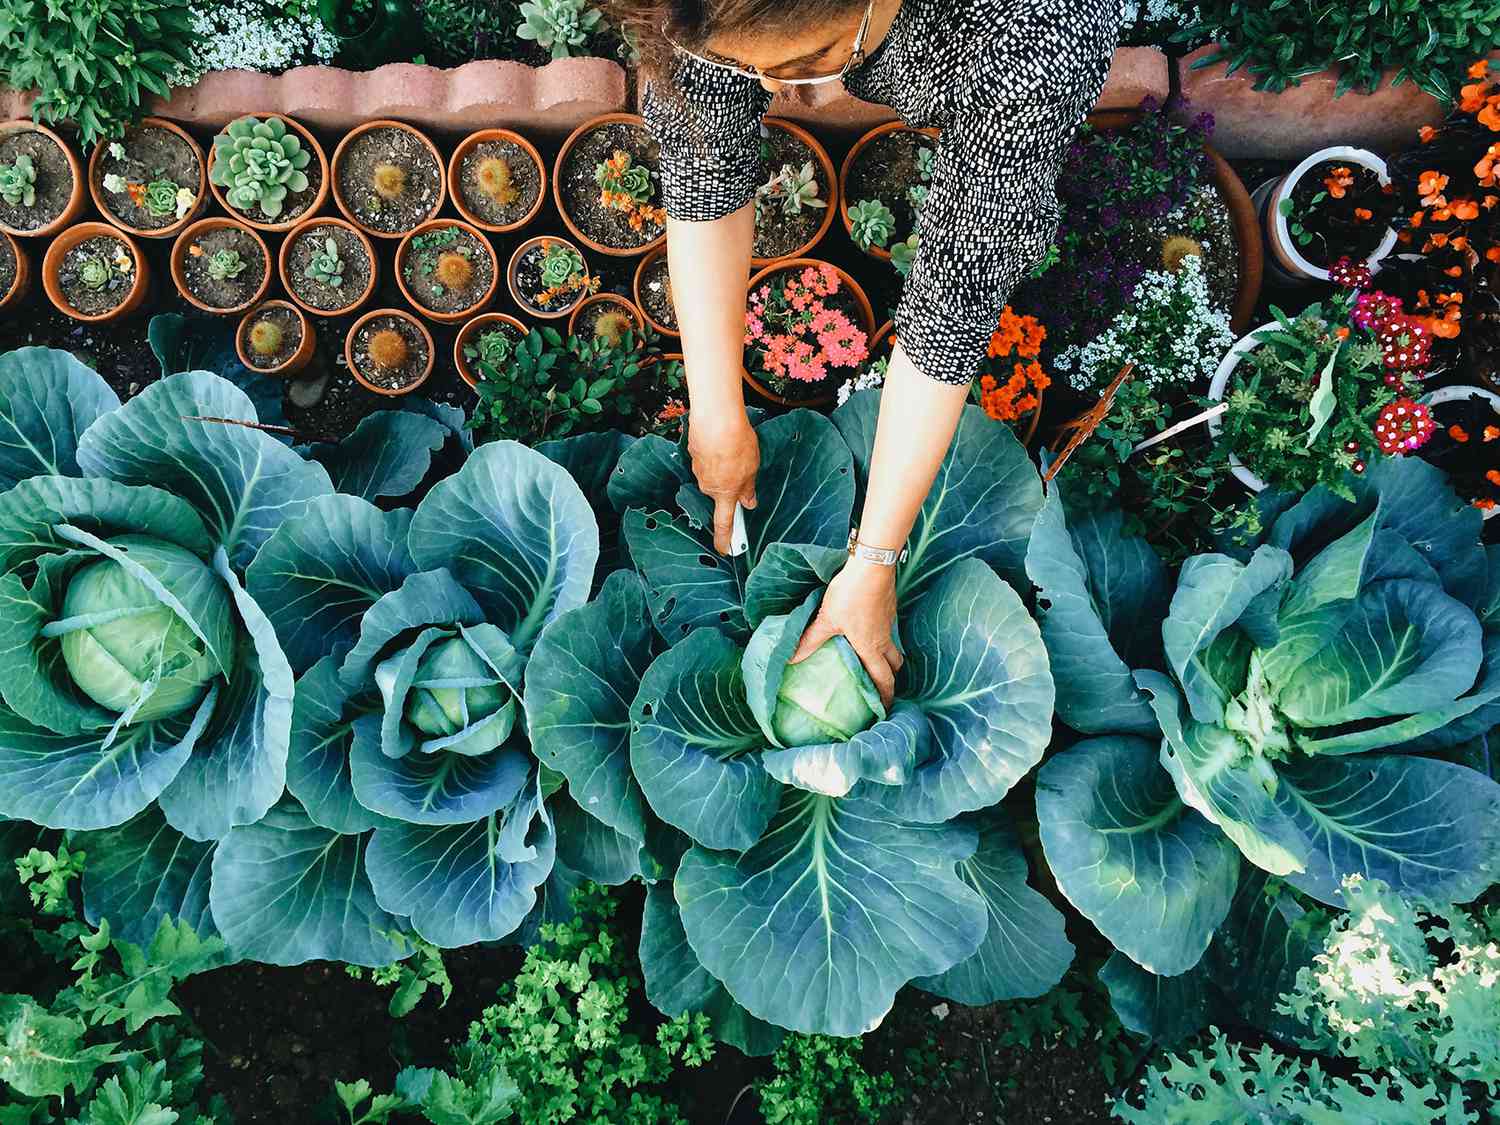 Why You Should Consider Transforming Part of Your Home Garden Into a Backyard Food Forest | Martha Stewart